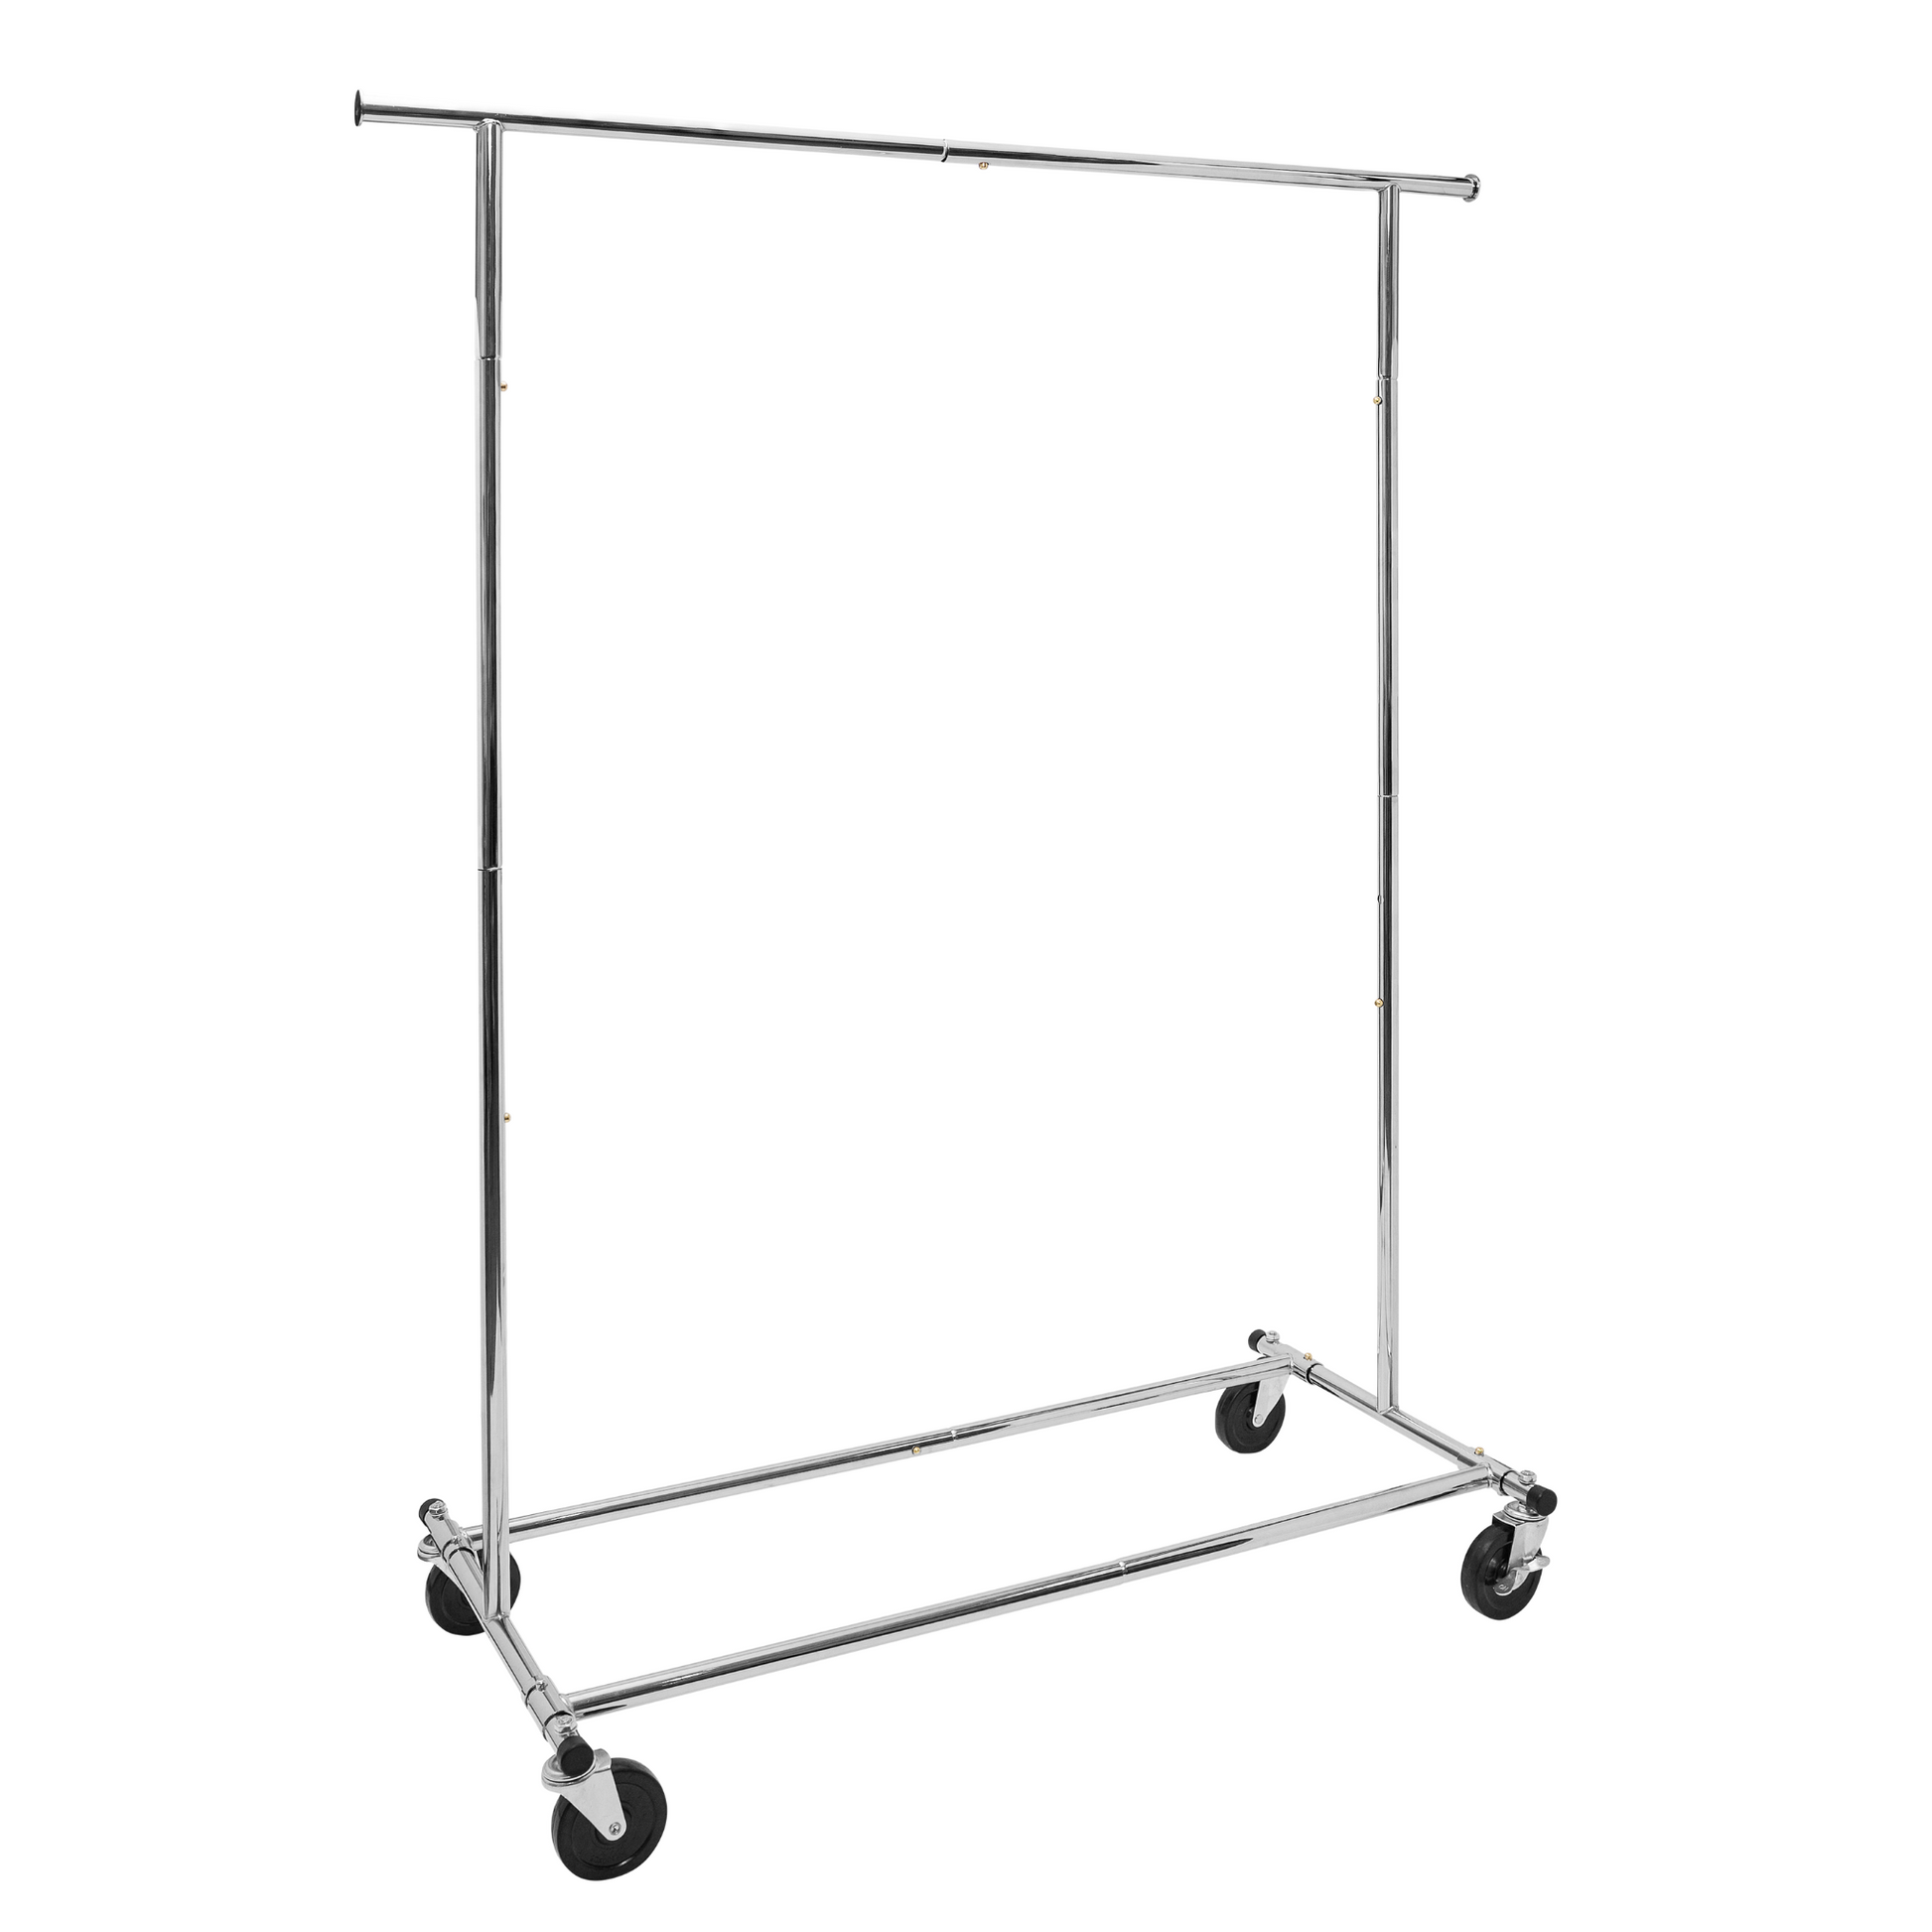 N2 Heavy Duty Chrome Metal Rolling Clothing Rack - Commercial